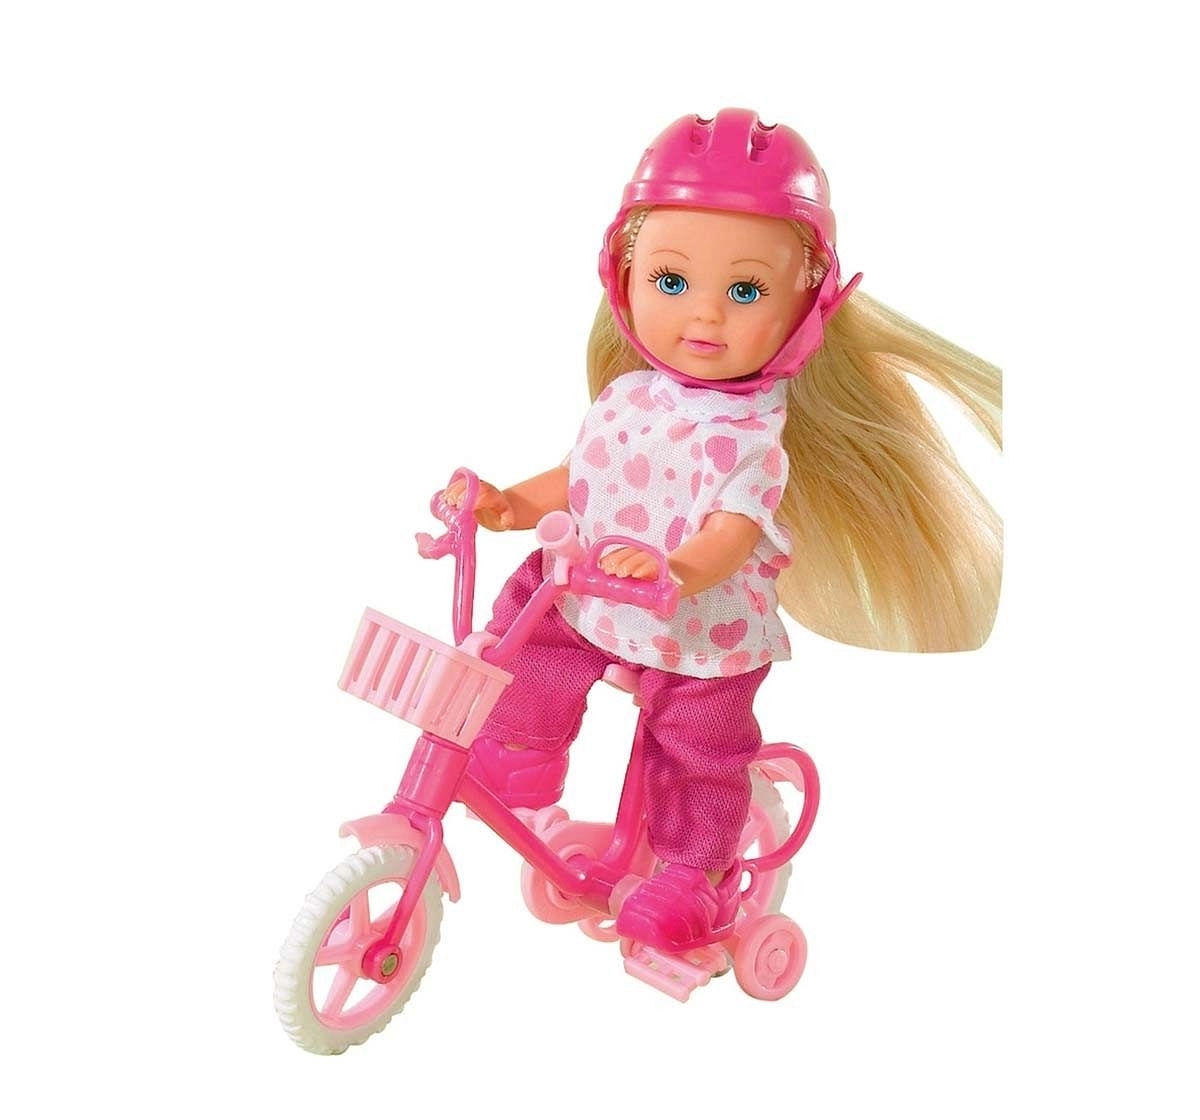 Simba Steffi Love Evi My First Bike Dolls & Accessories for Kids Age 3Y+ (Pink)